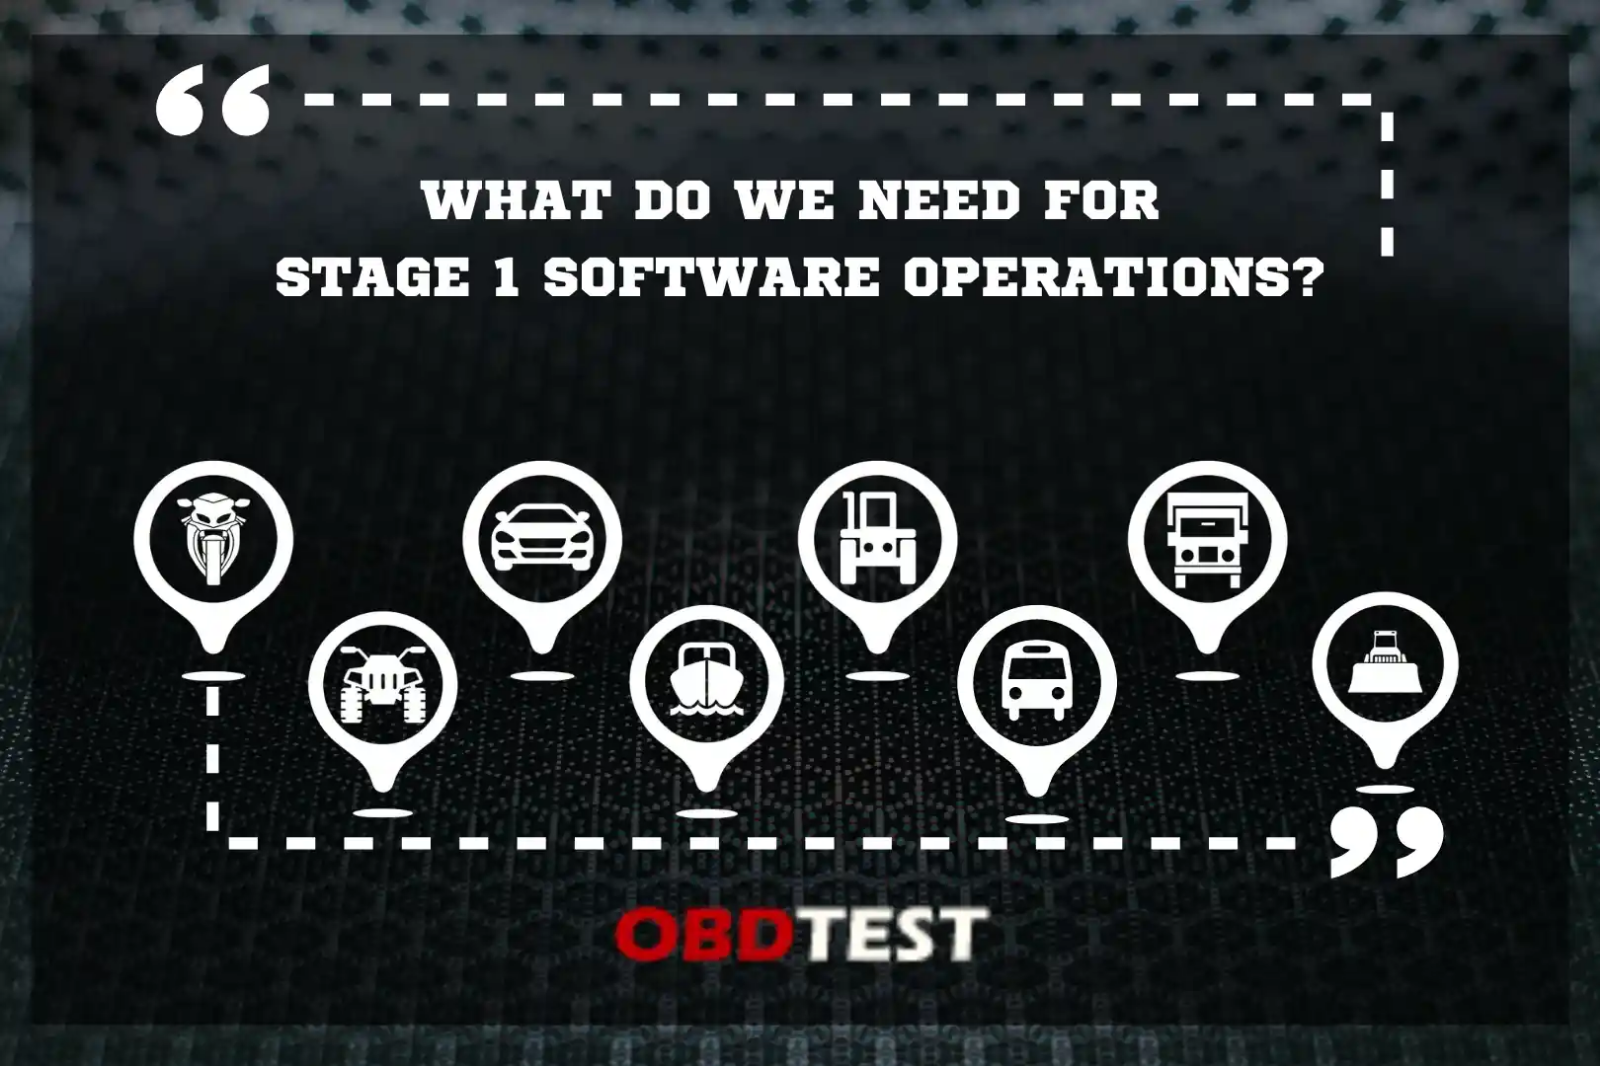 What do we need for Stage 1 software operations?